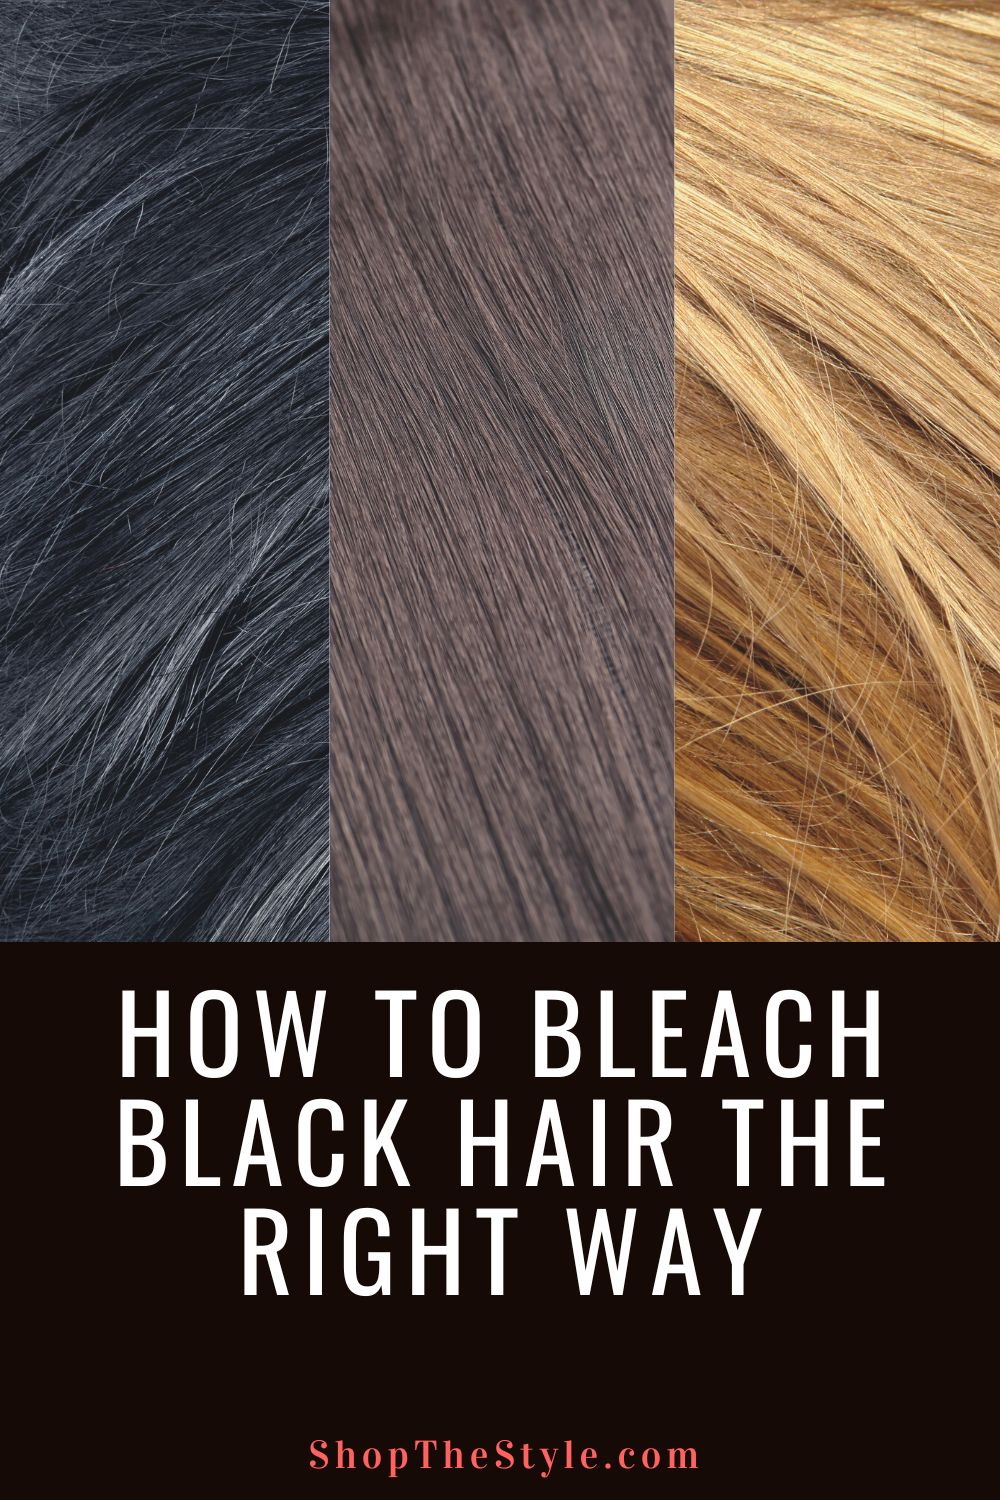 How to Bleach Black Hair the Right Way